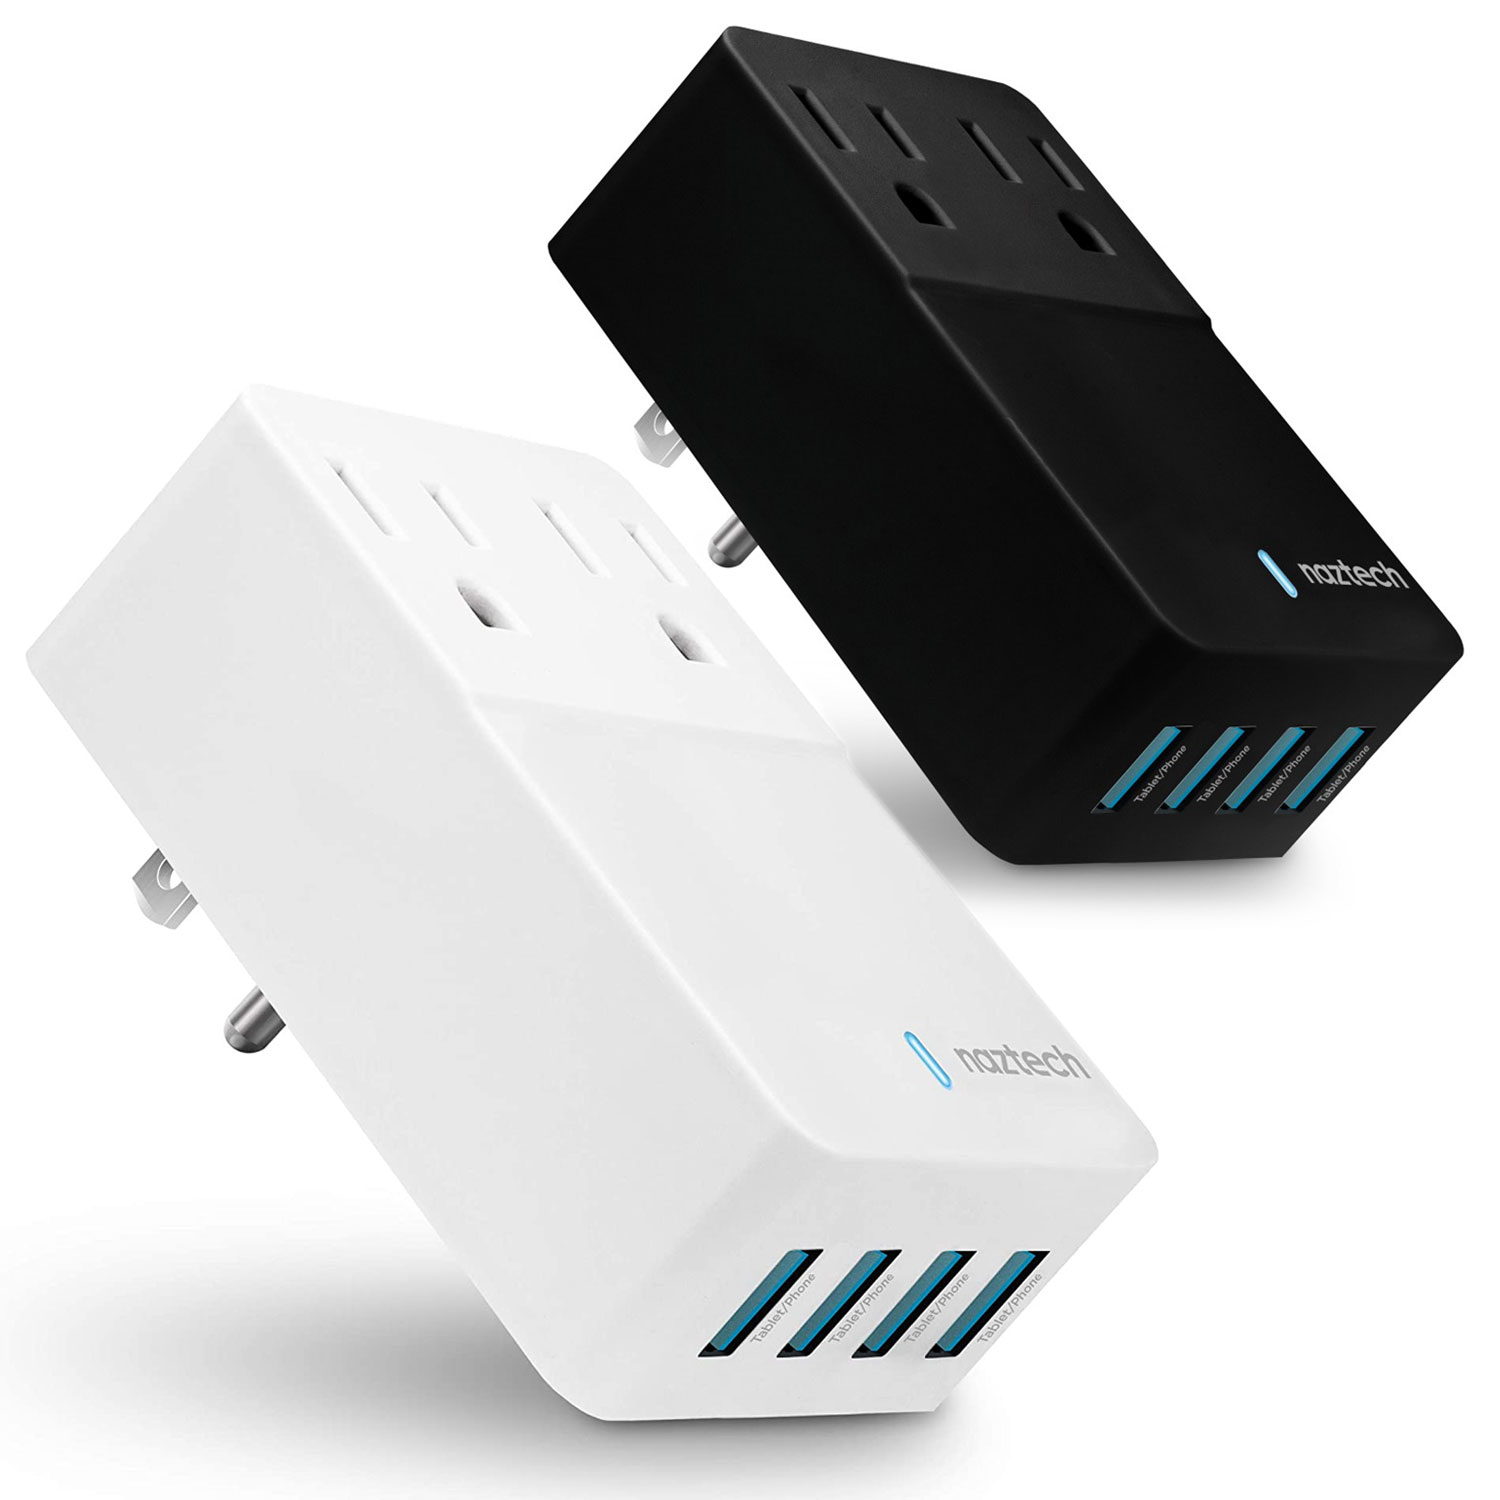 Naztech Fast Multi-Device Charger